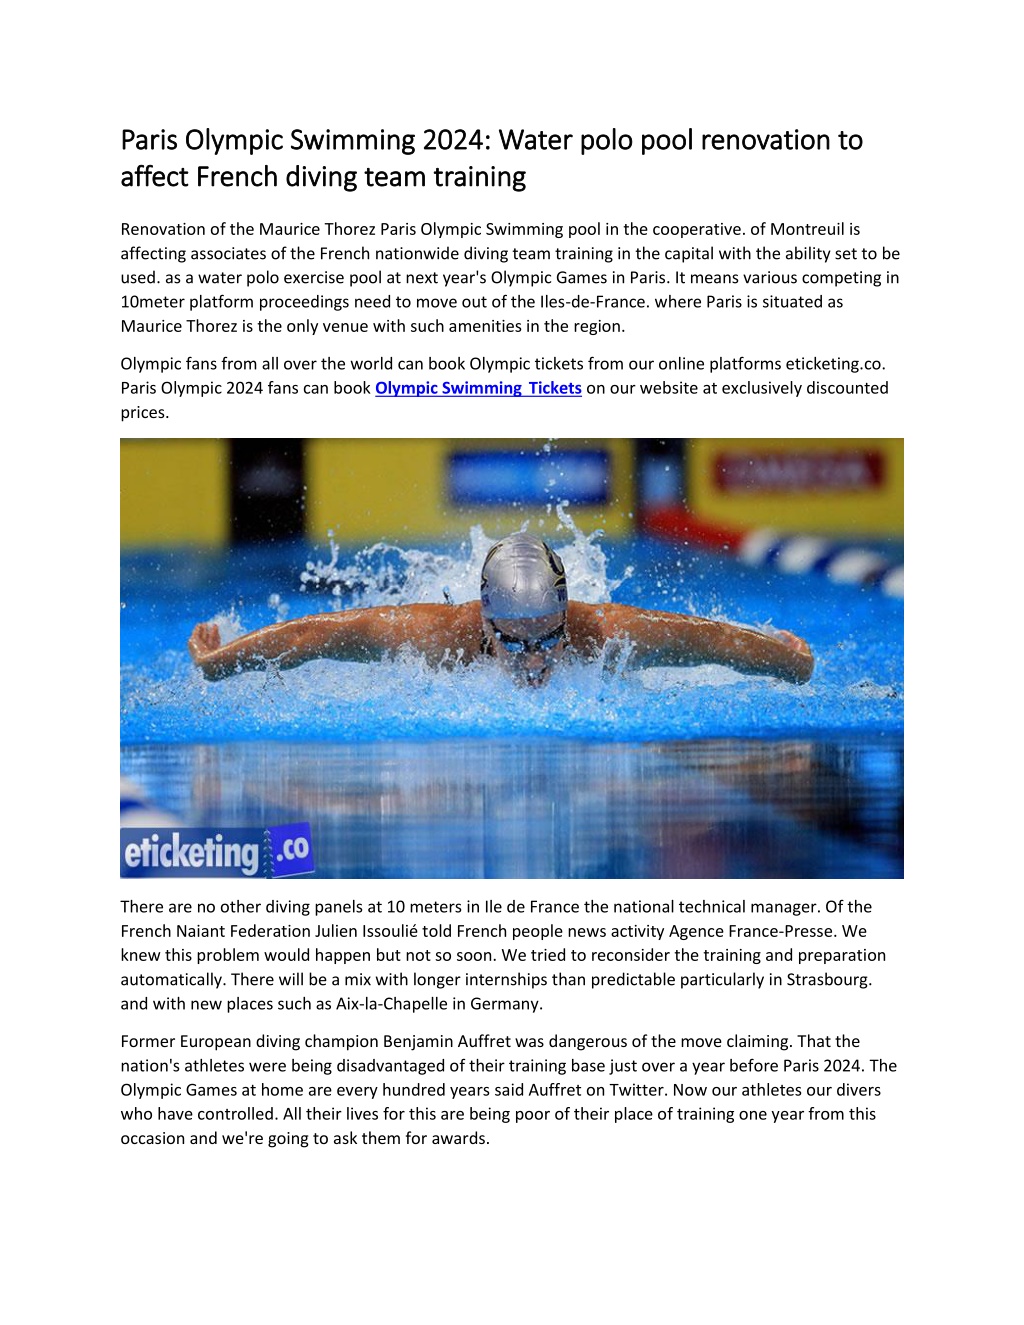 PPT Paris Olympic Swimming 2024 Water polo pool renovation to affect